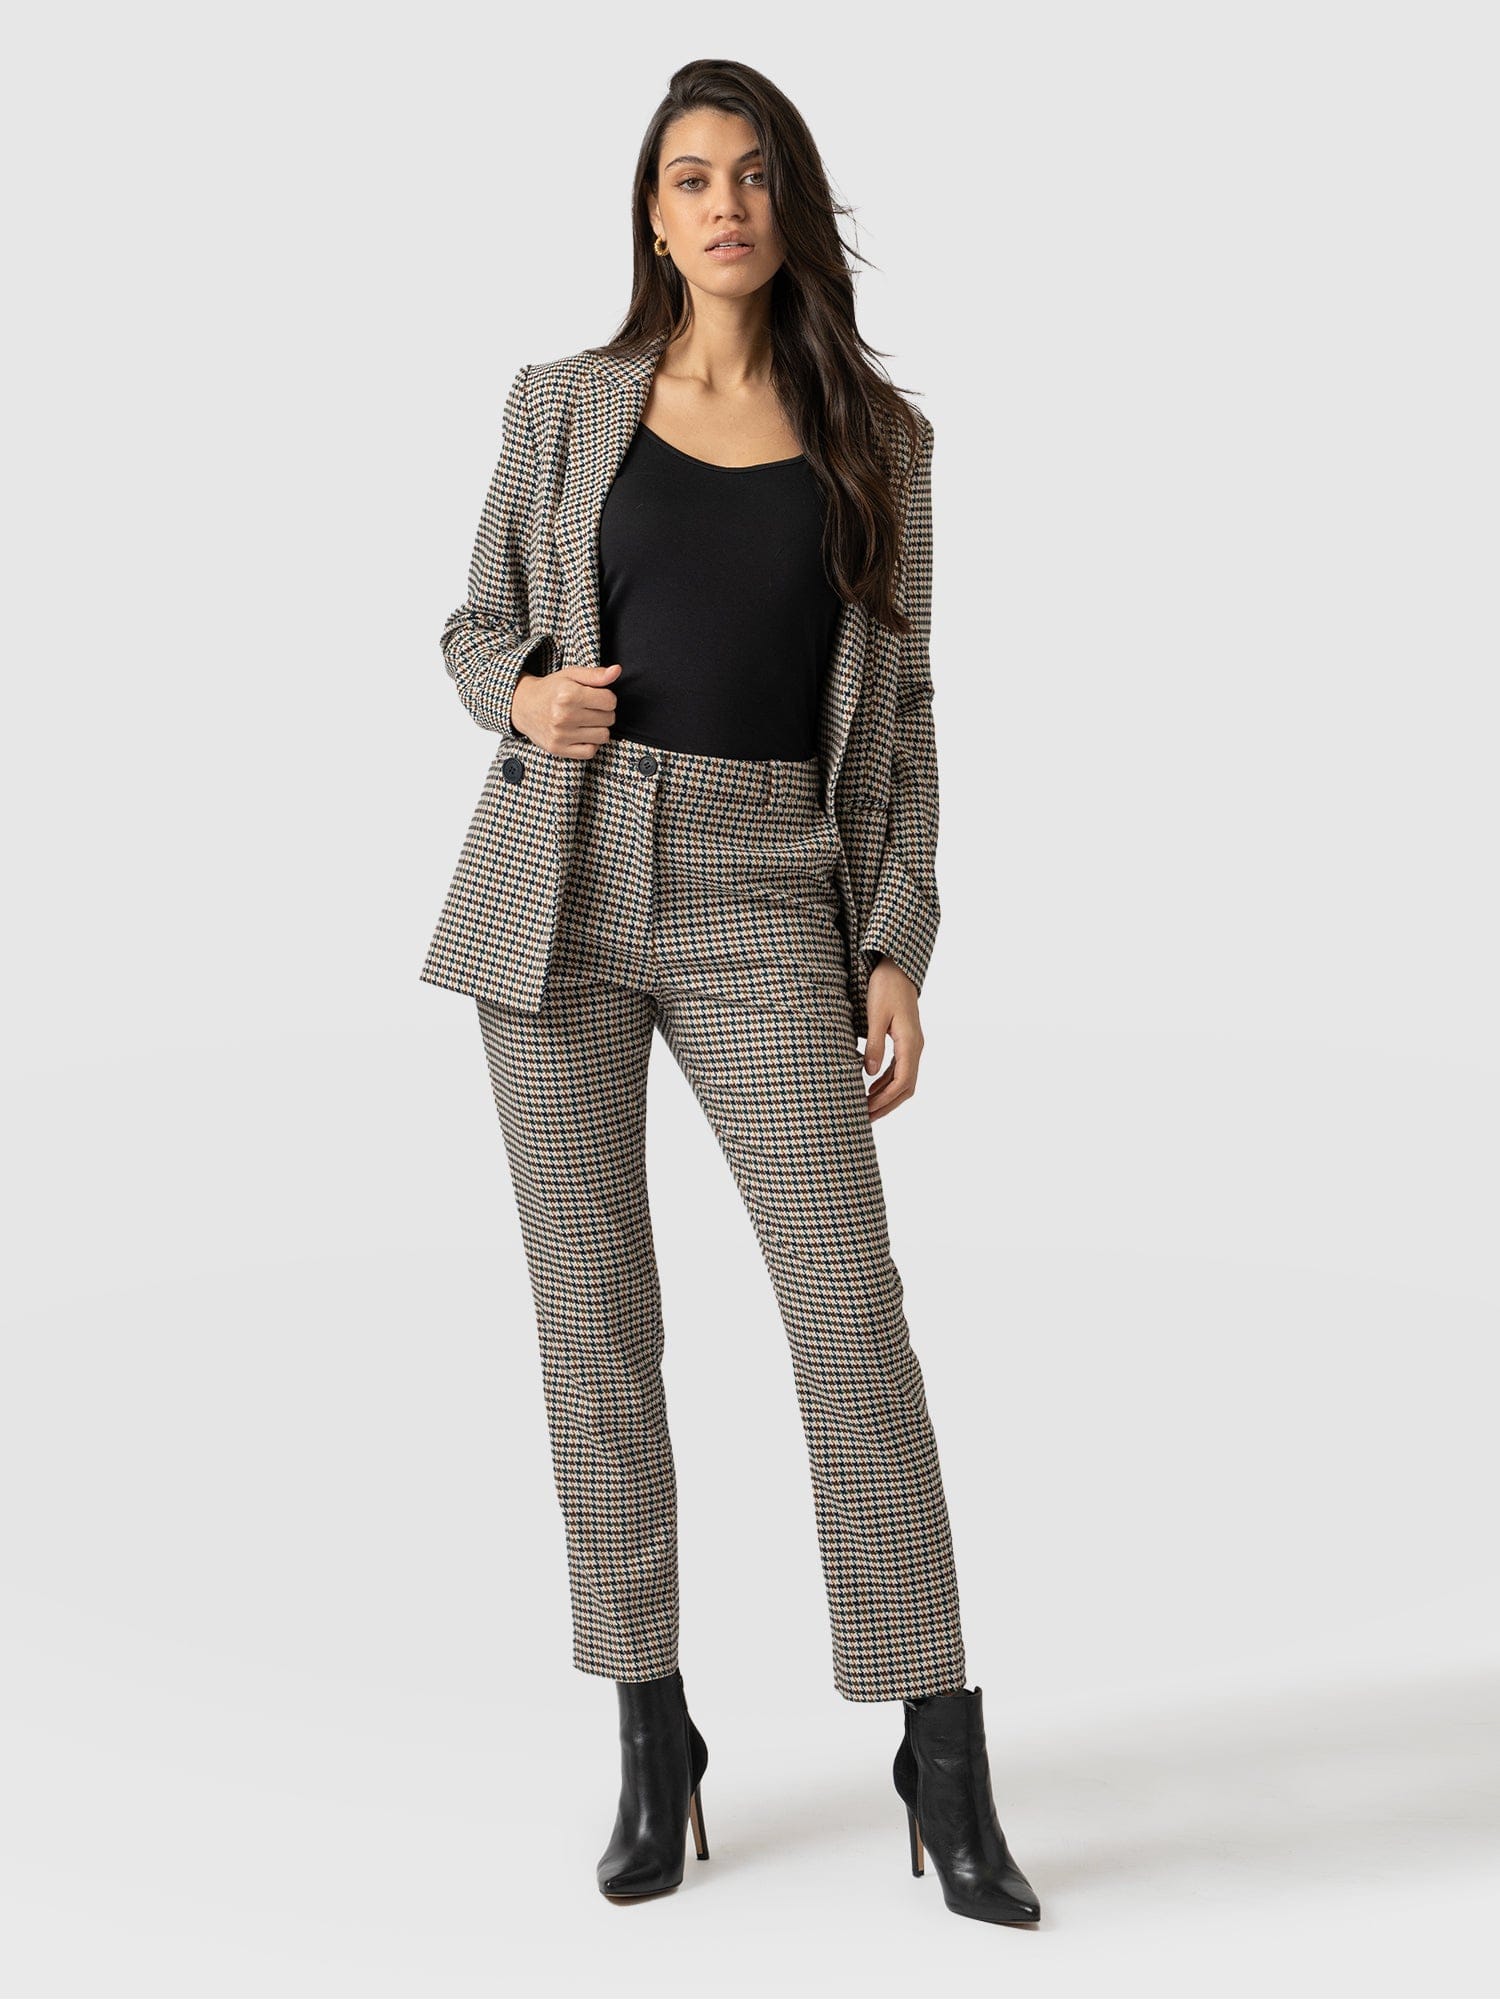 Brown Jacquard Trousers – The Silk Road